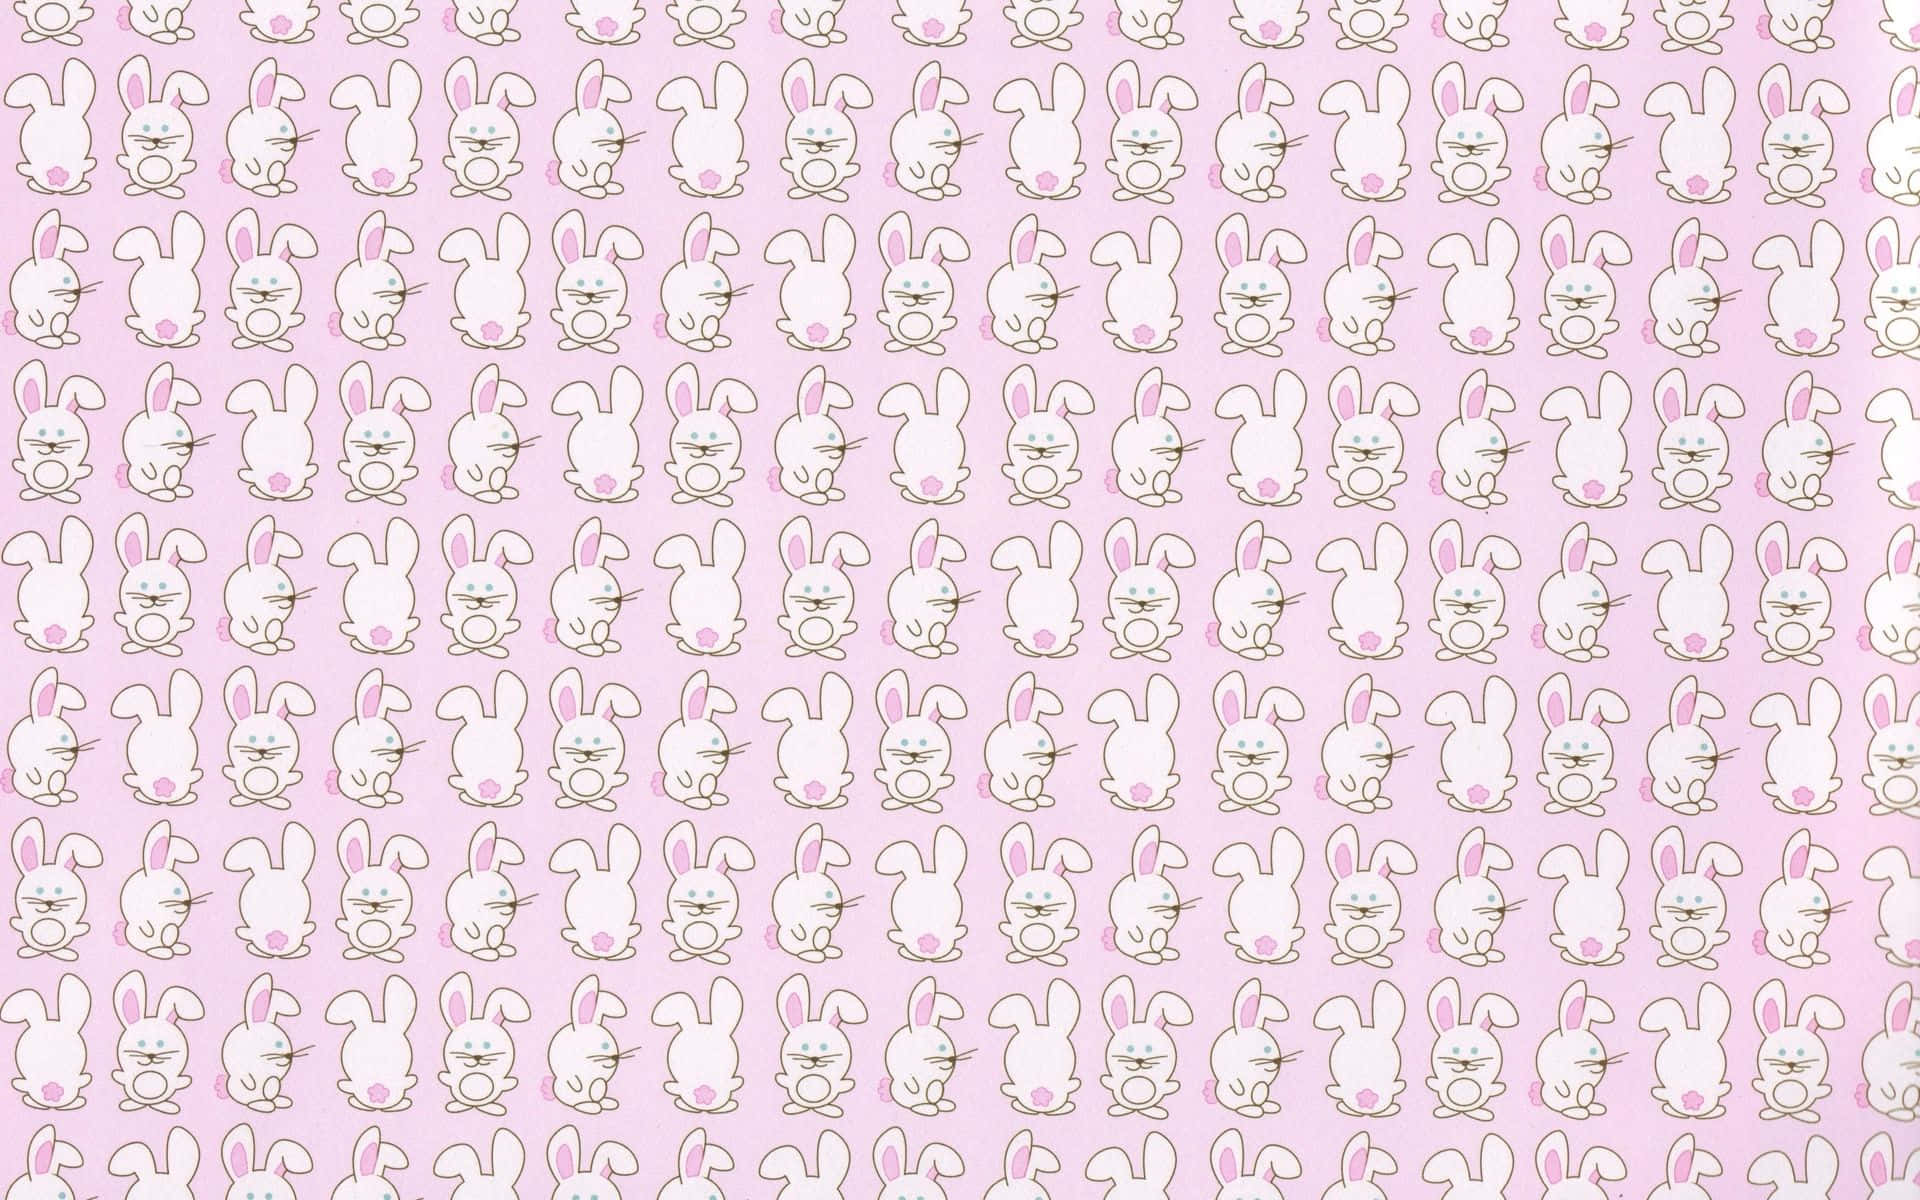 Cute Kawaii Bunny Bringing a Smile To Your Day Wallpaper